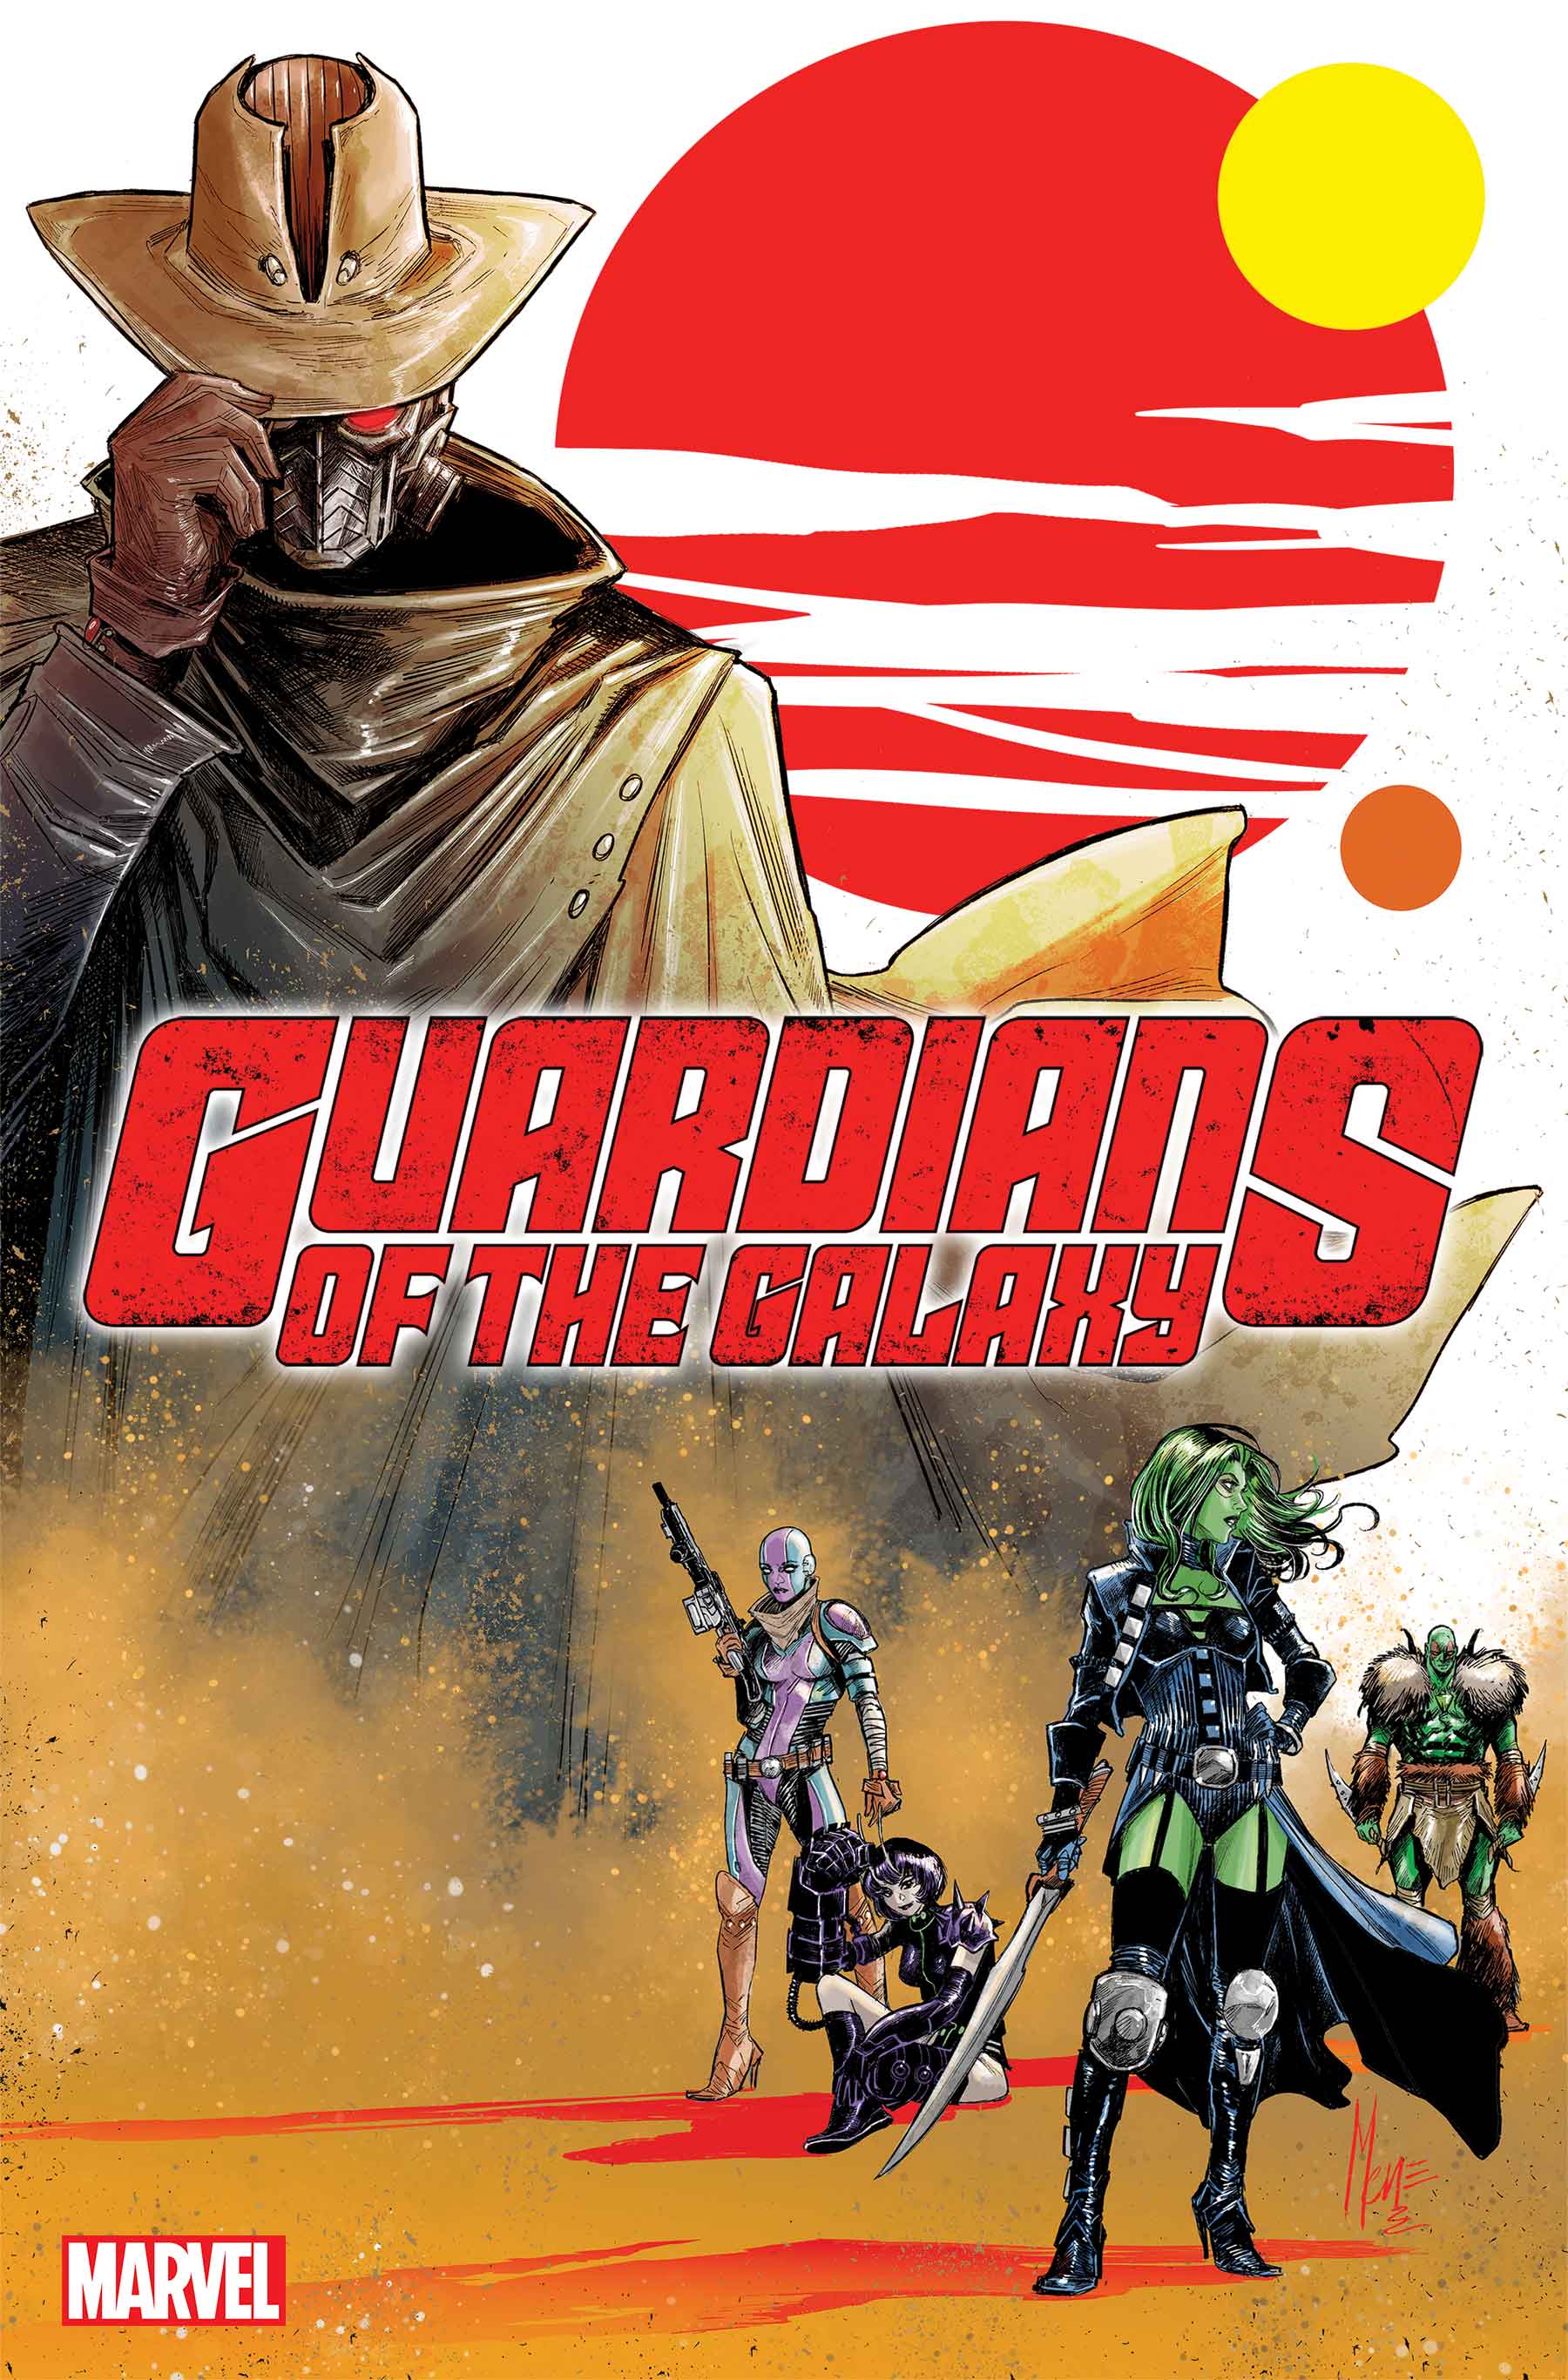 Guardians of the Galaxy #1 cover